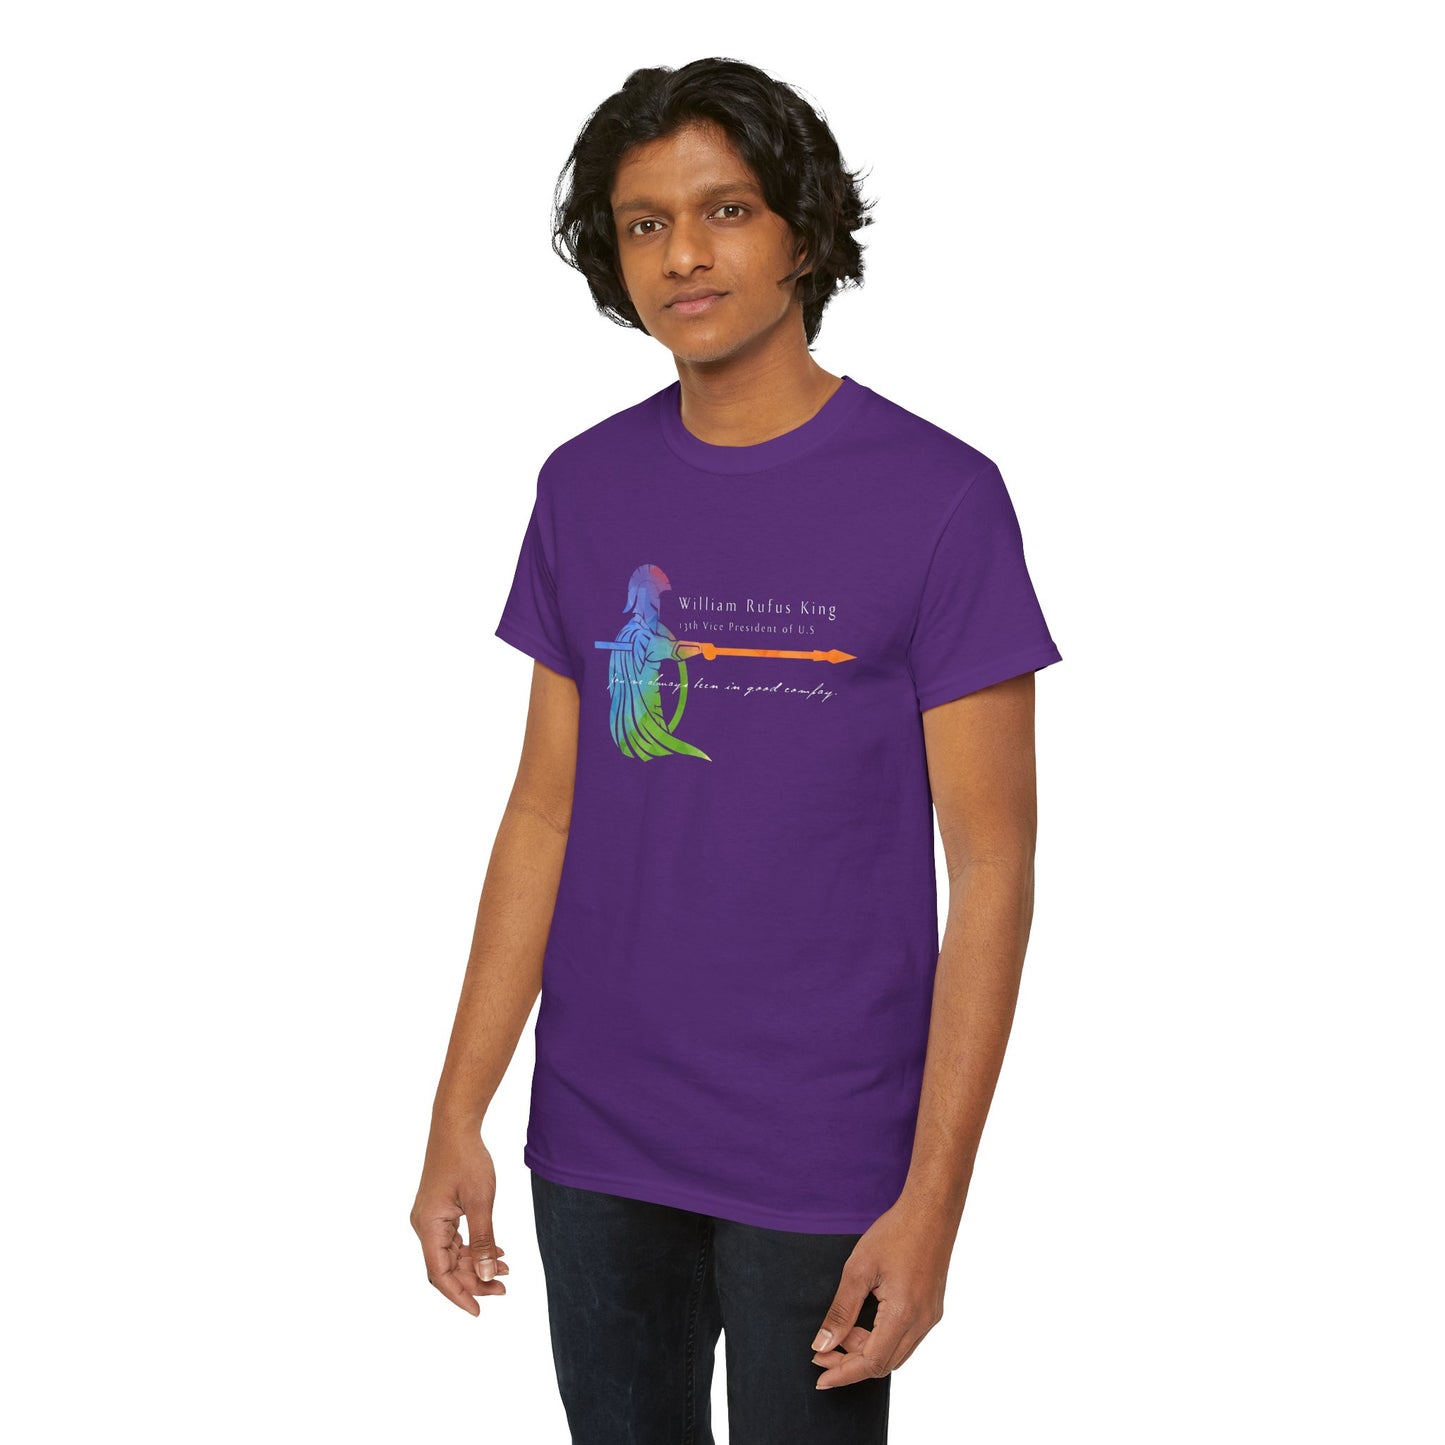 William Rufus King | 13th Vice President of the United States | Pride T-Shirt